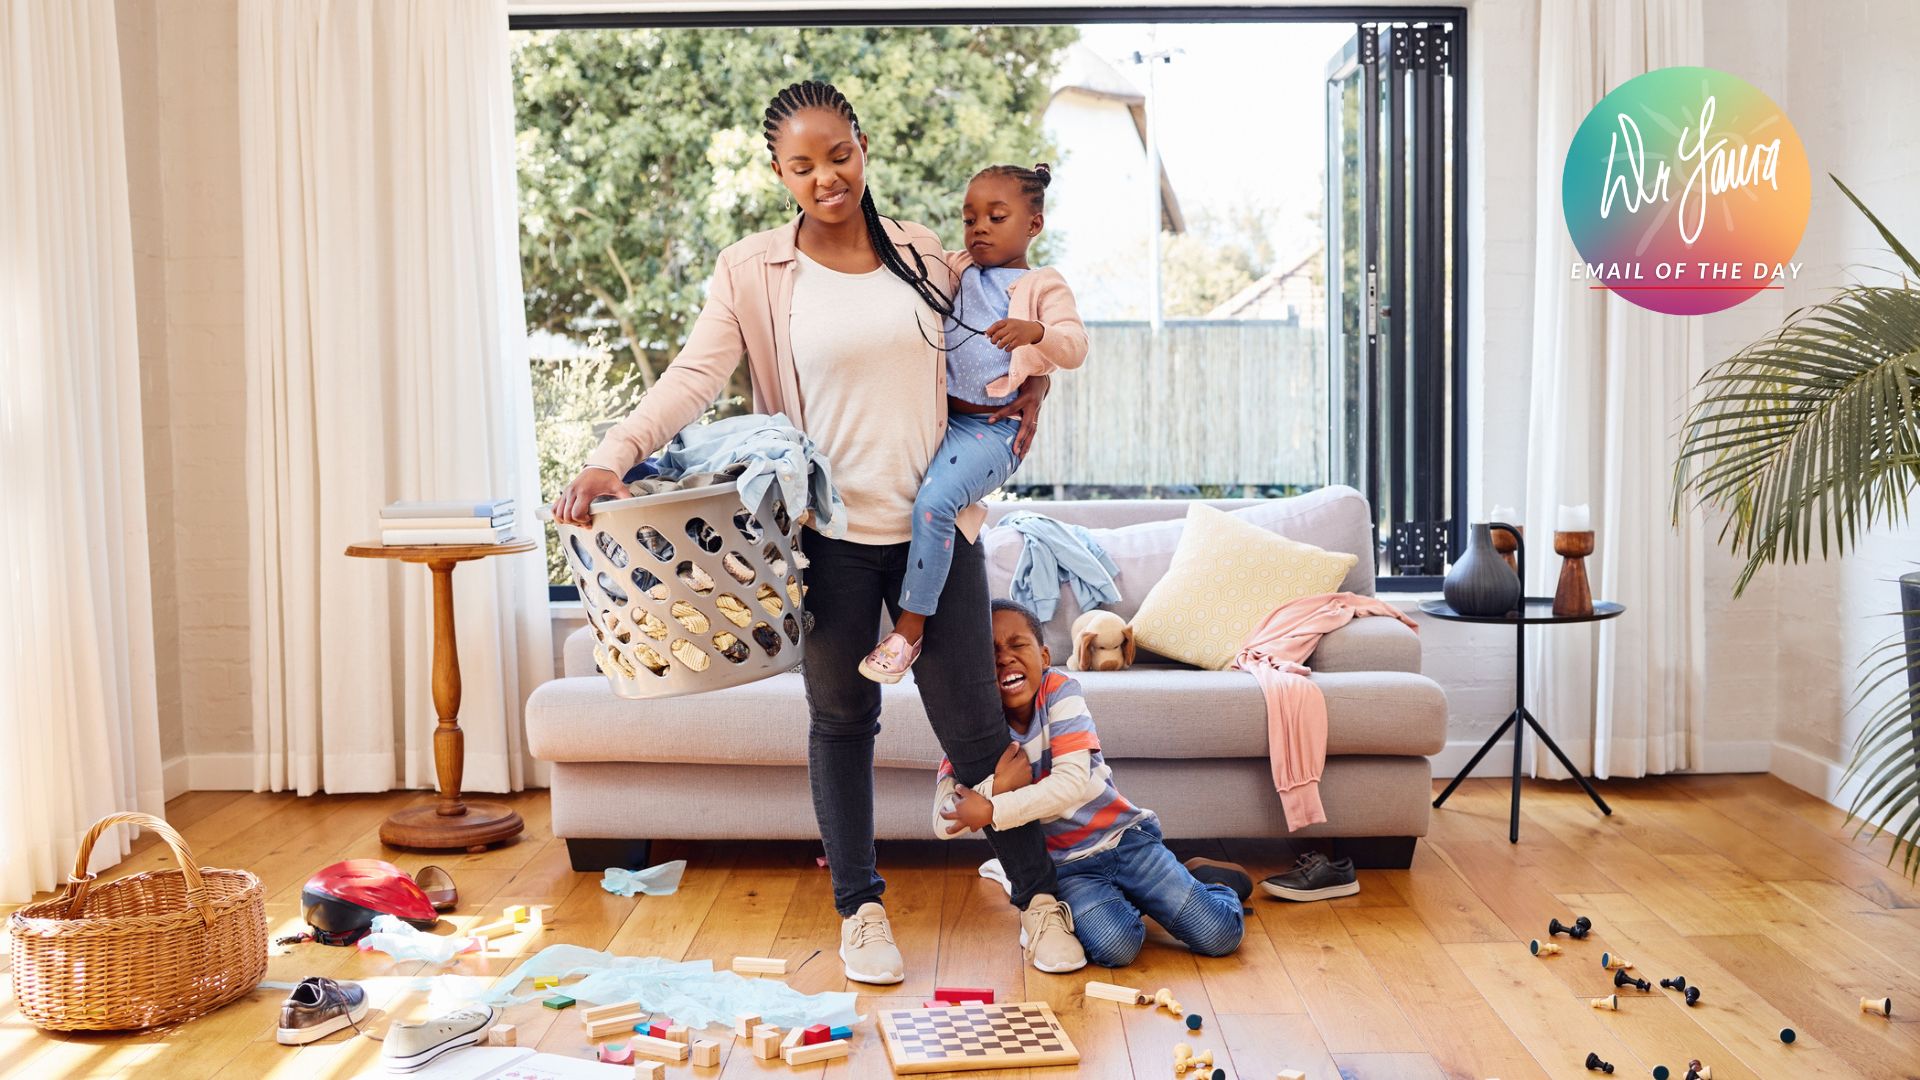 Woman carries toddler in messy living room while young girl hangs onto one of the woman's legs